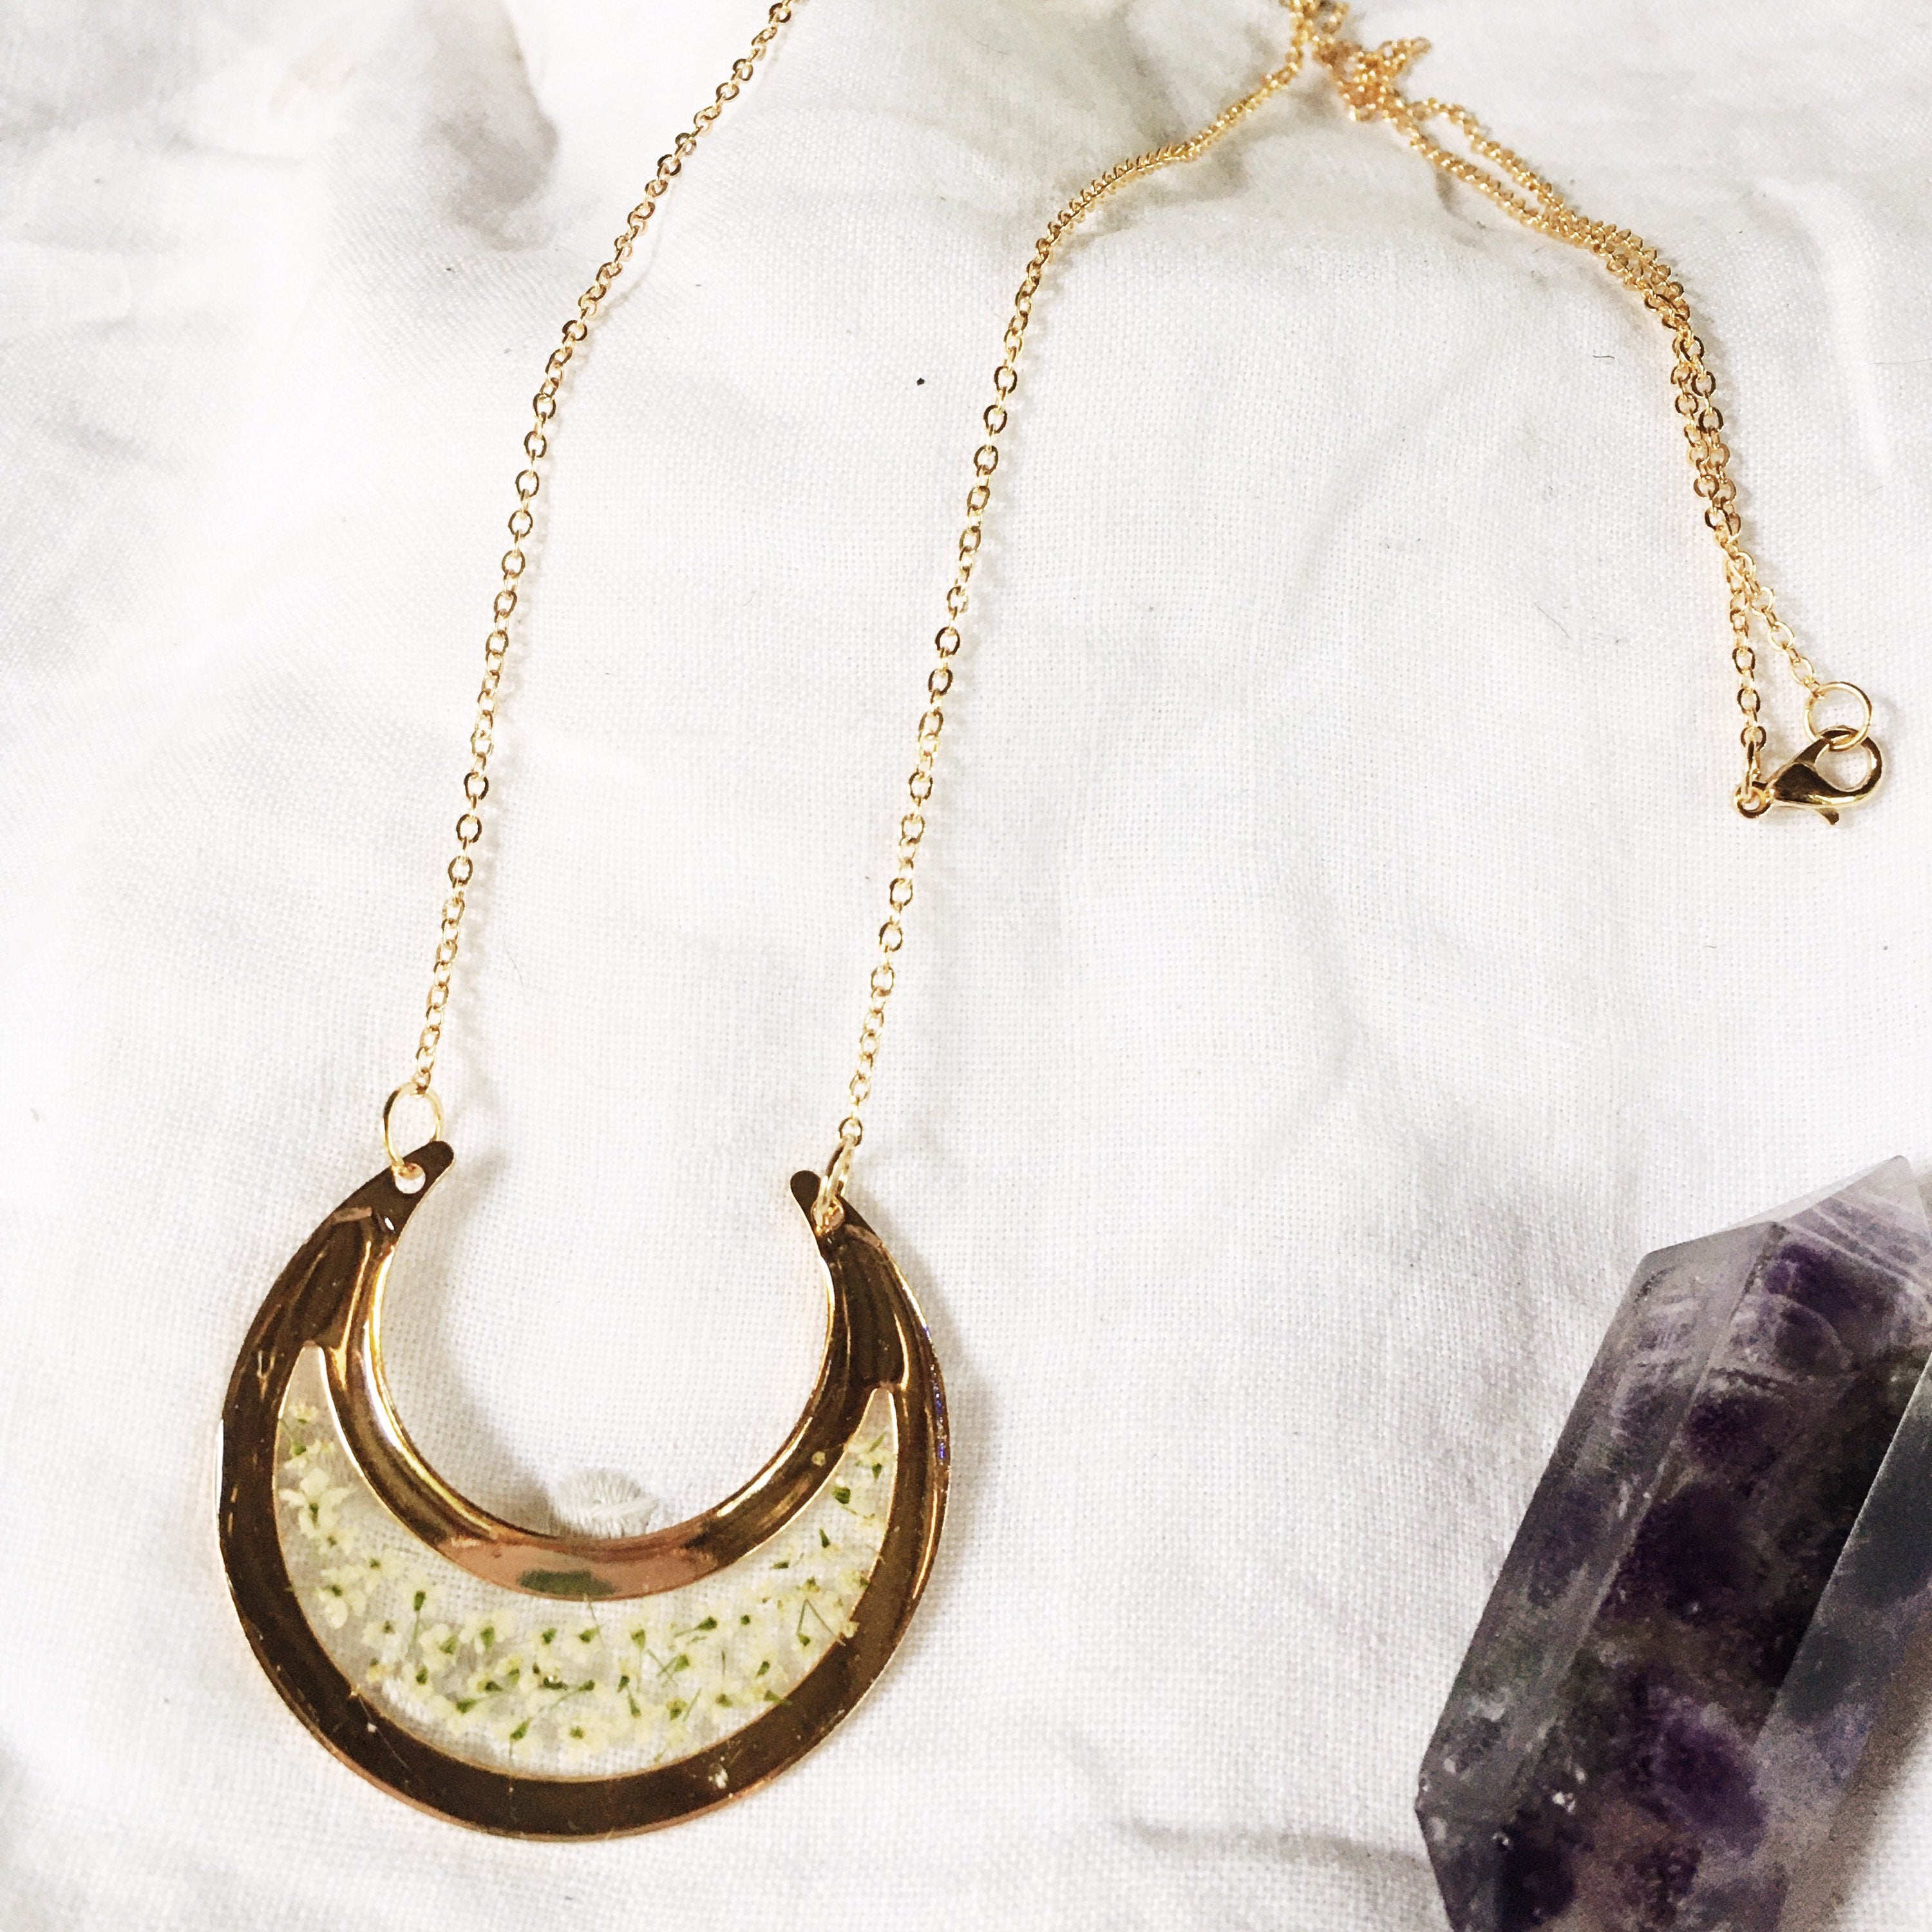 Crescent City Chic - Gold Crescent Moon Necklace with Queen Anne's Lace